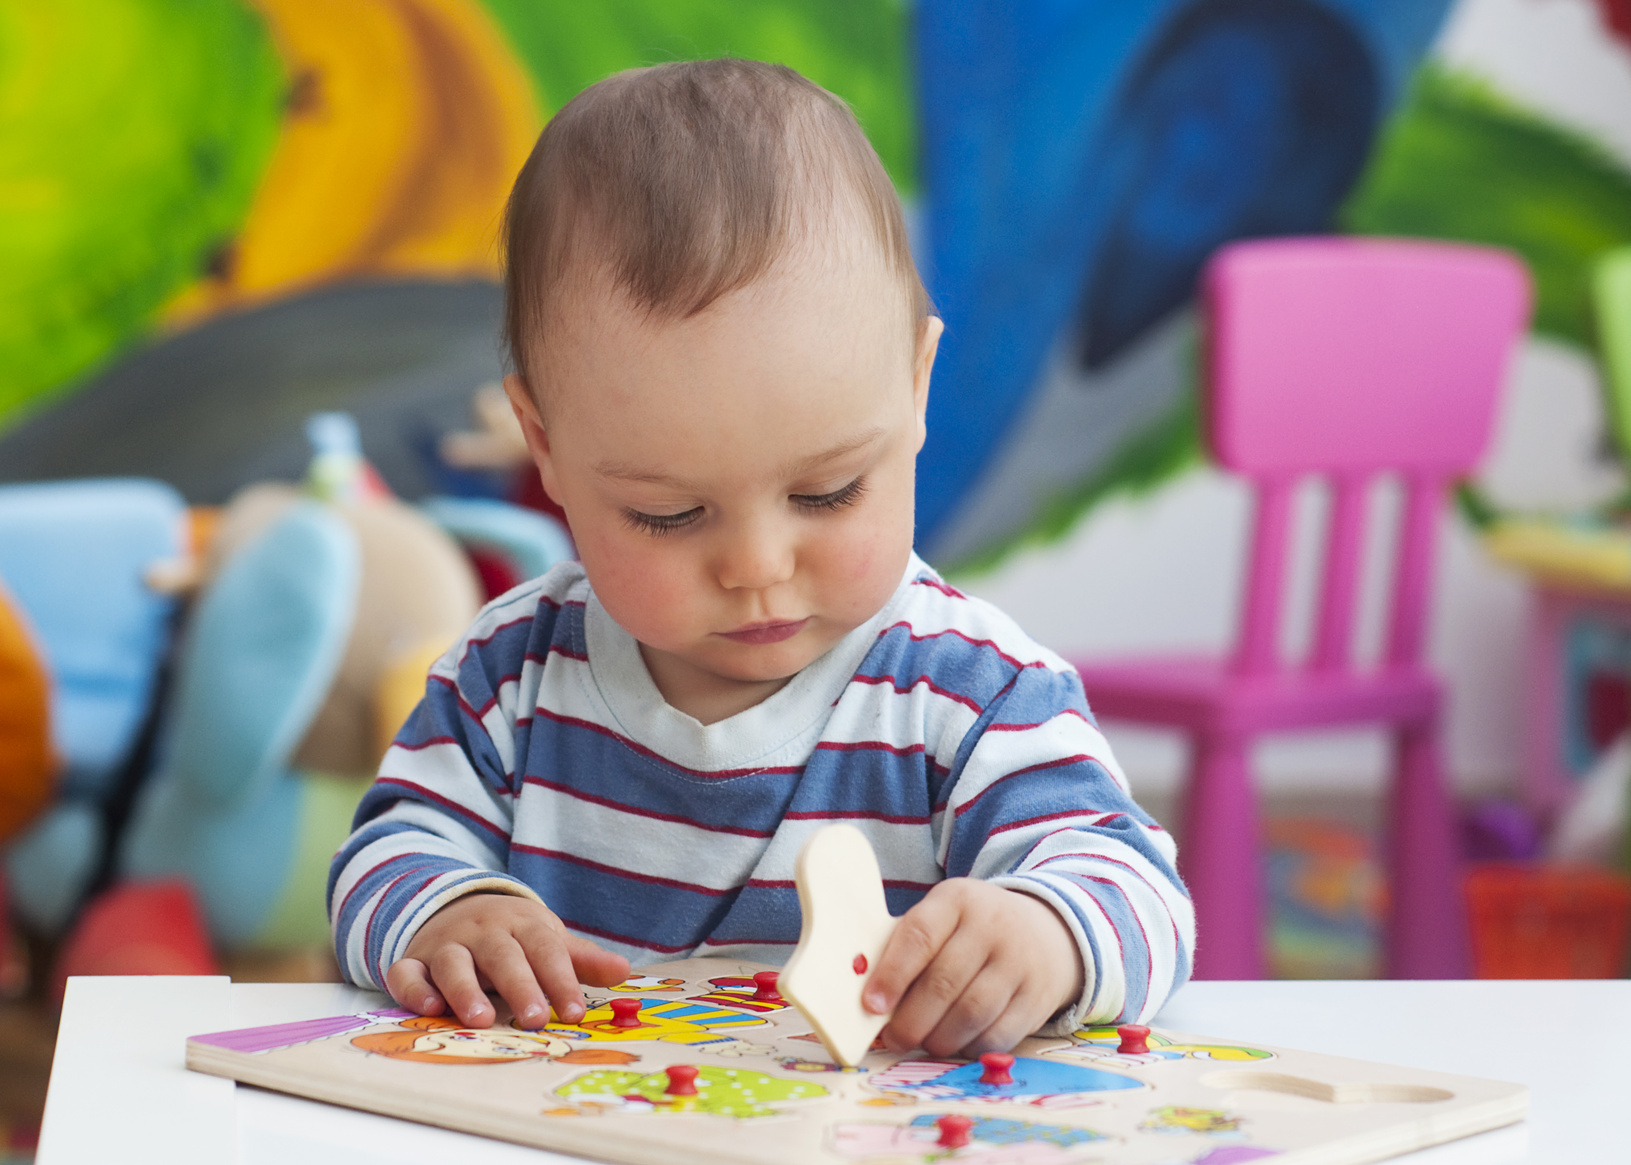 Toddler or a baby child playing with puzzle in a nursery.